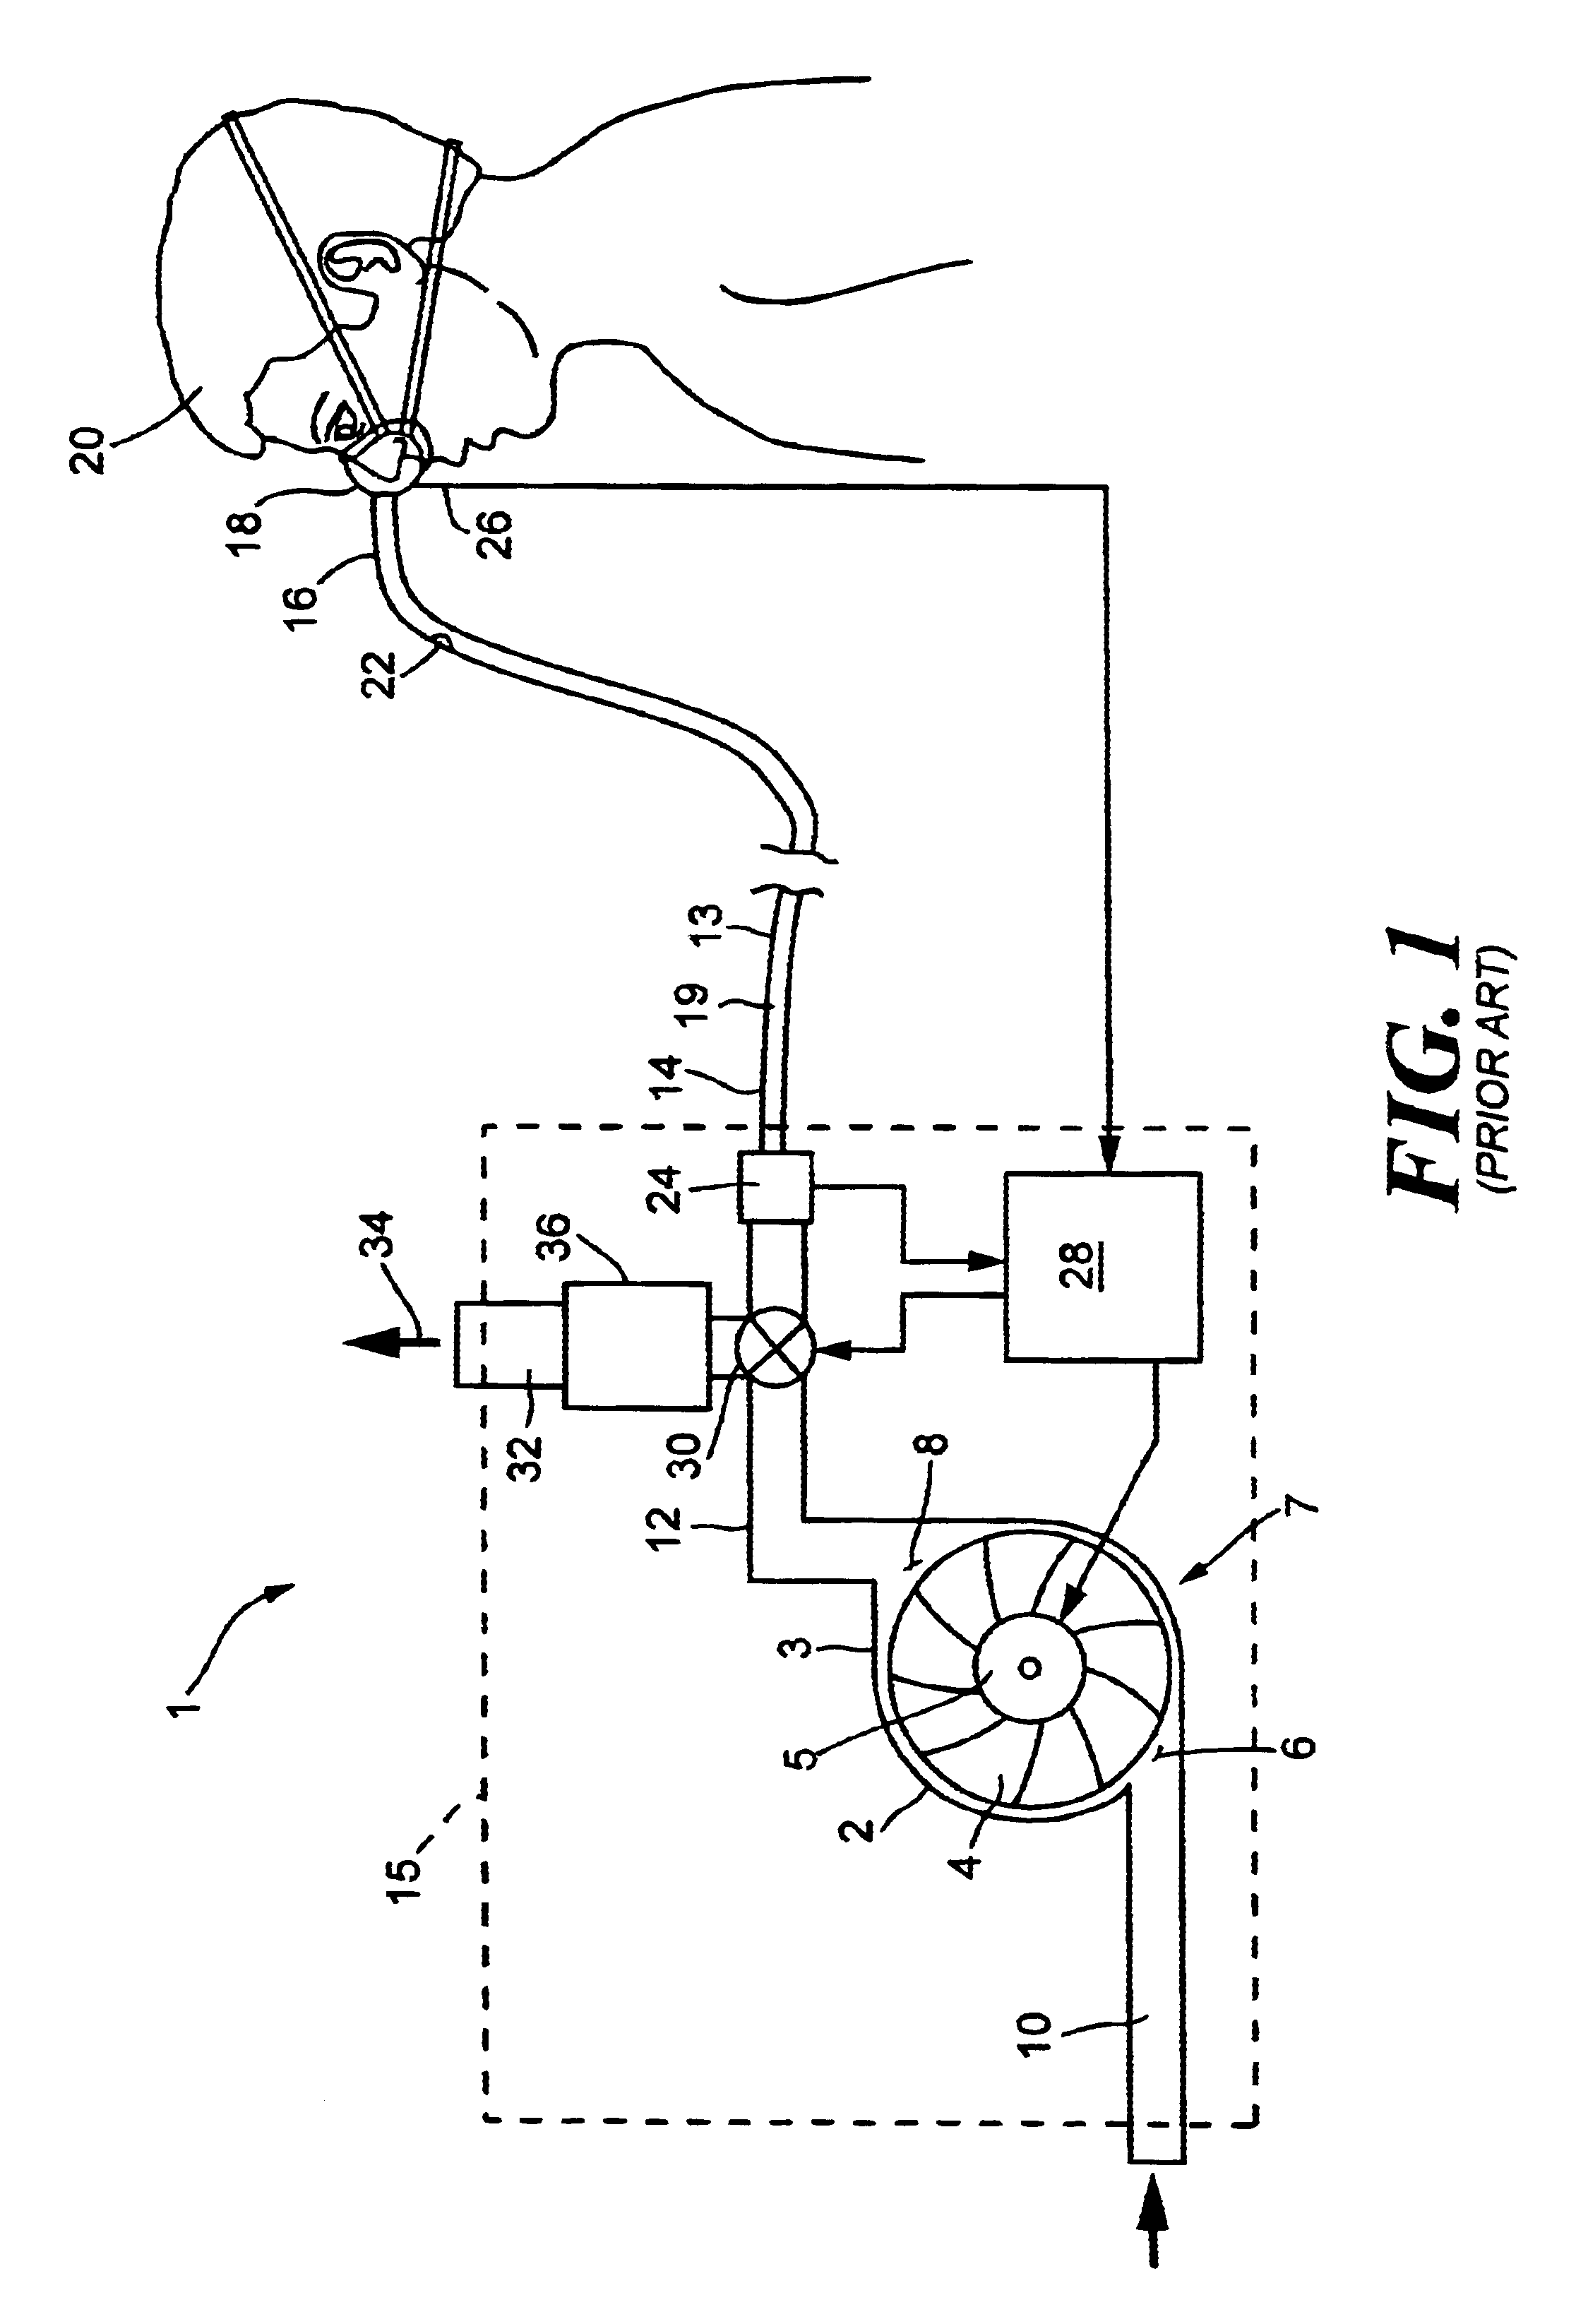 Pressure support system and method and a pressure control valve for use in such system and method